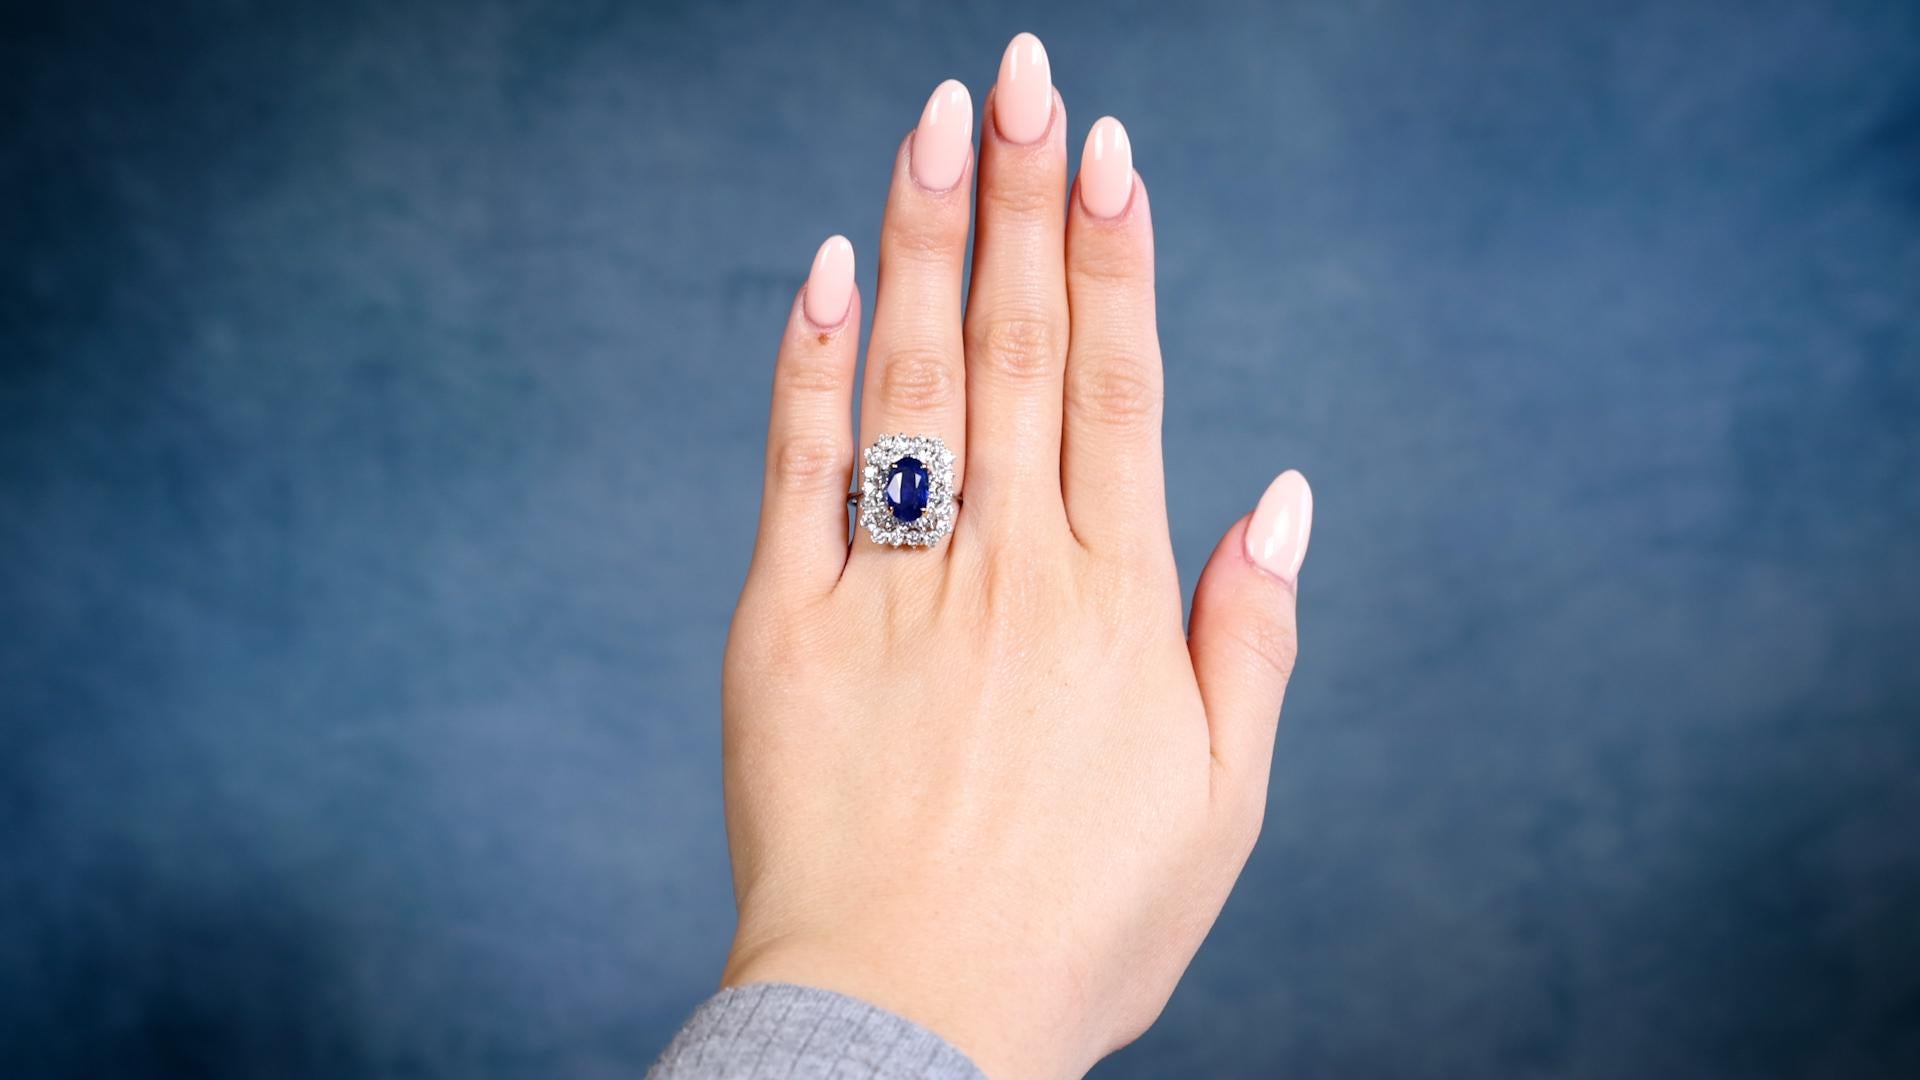 One Vintage GIA 2.08 Carat Ceylon Sapphire 18k White Gold Double Halo Ring. Featuring one oval mixed cut of 2.08 carats, accompanied by GIA #2235186786 stating the sapphire is of Ceylon (Sri Lanka) origin. Accented by 32 round brilliant cut diamonds